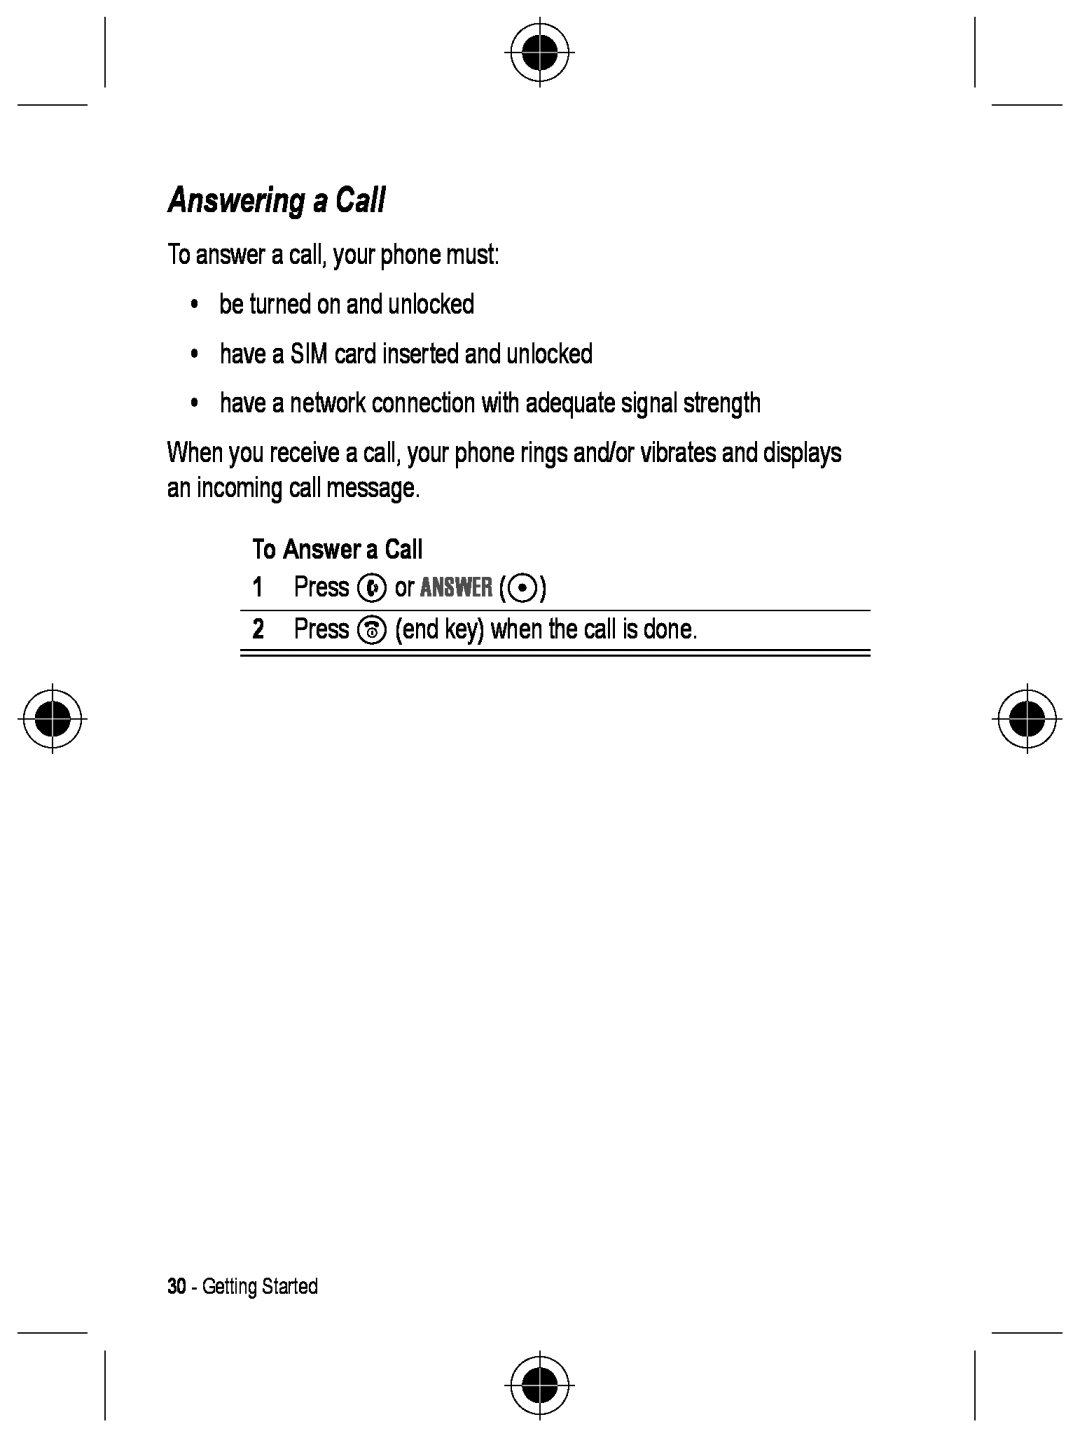 Motorola C330 manual Answering a Call, To Answer a Call, Getting Started 